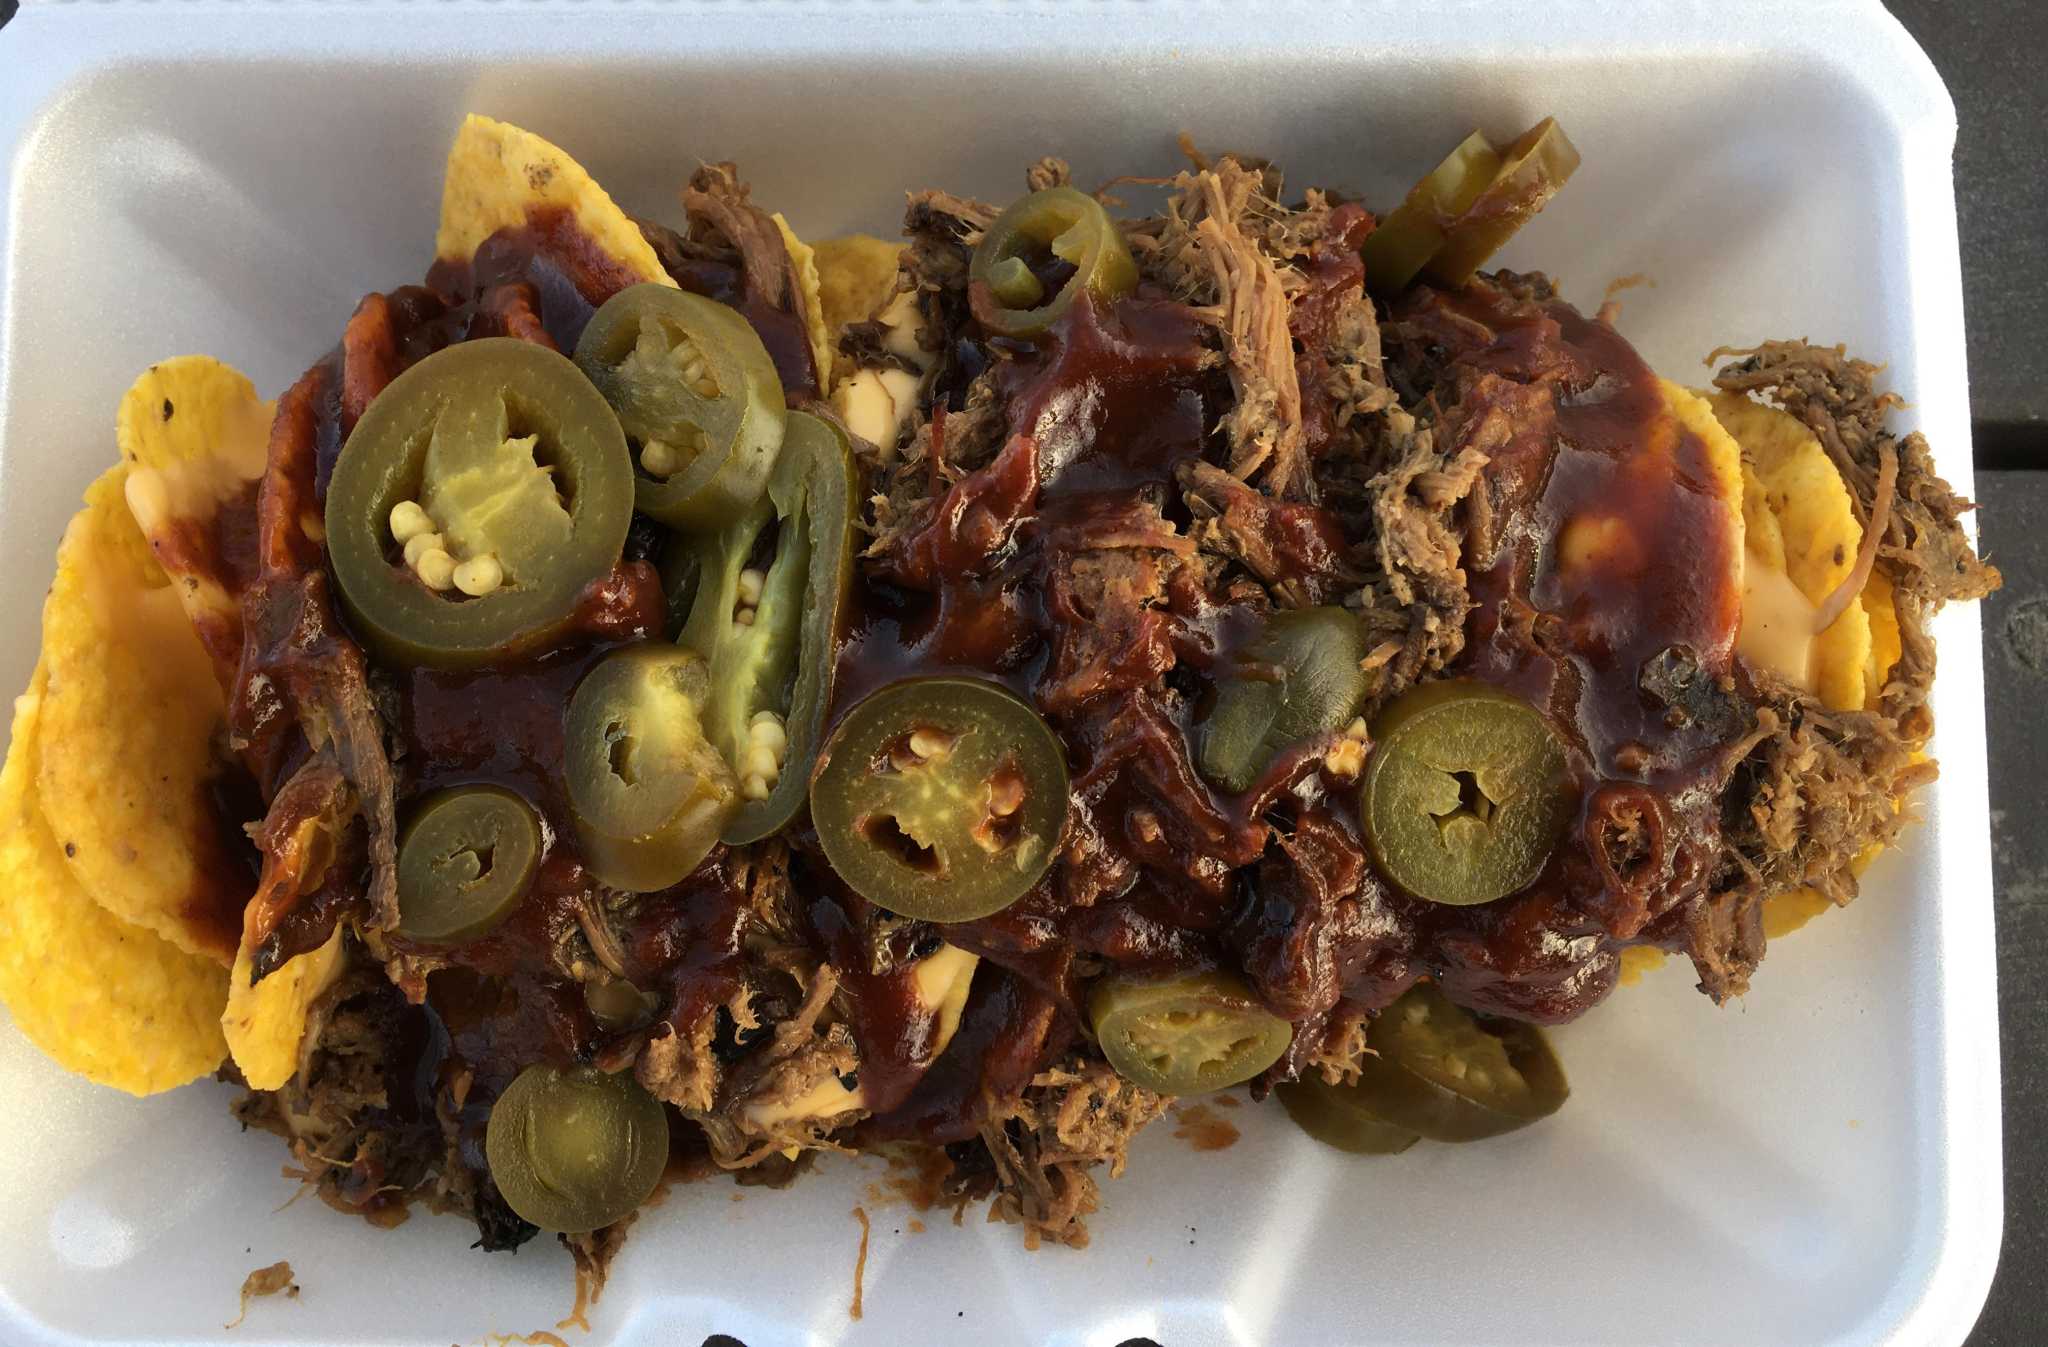 Schertz's Purple Pig BBQ excels at Midwest barbecue's rib tips and is heavy on the sauce